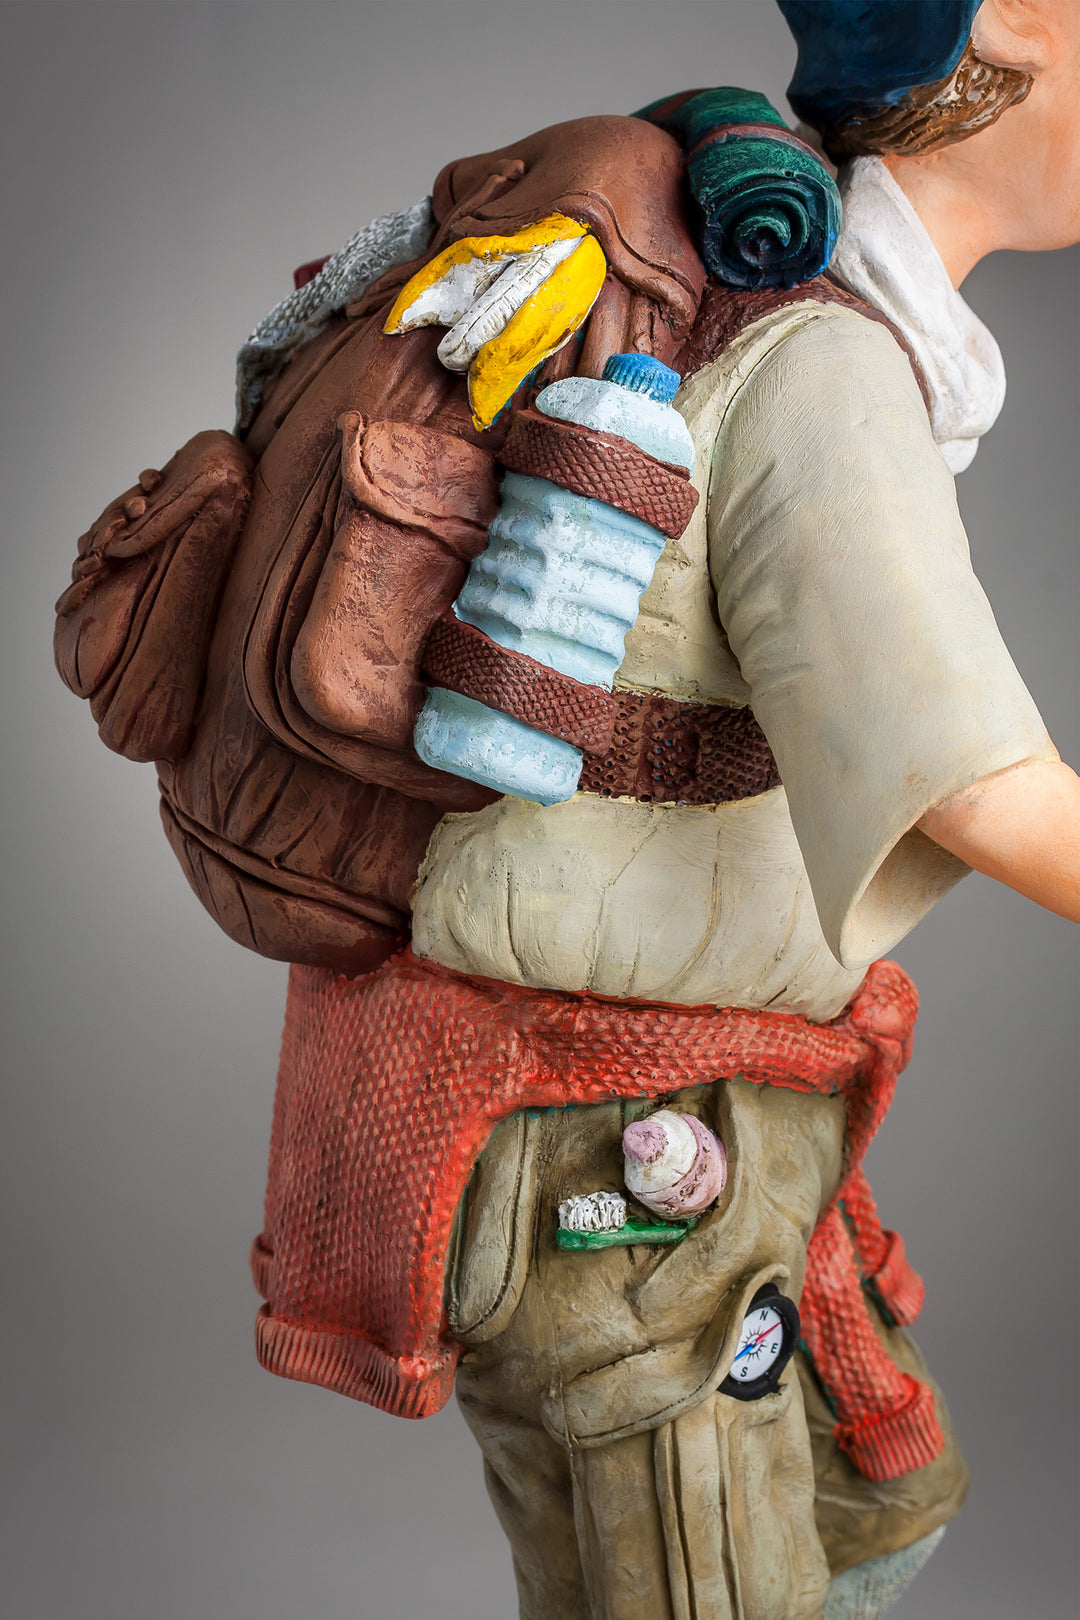 Guillermo Forchino - Comic Art Figurine - "The Hiker" - Buchan's Kerrisdale Stationery